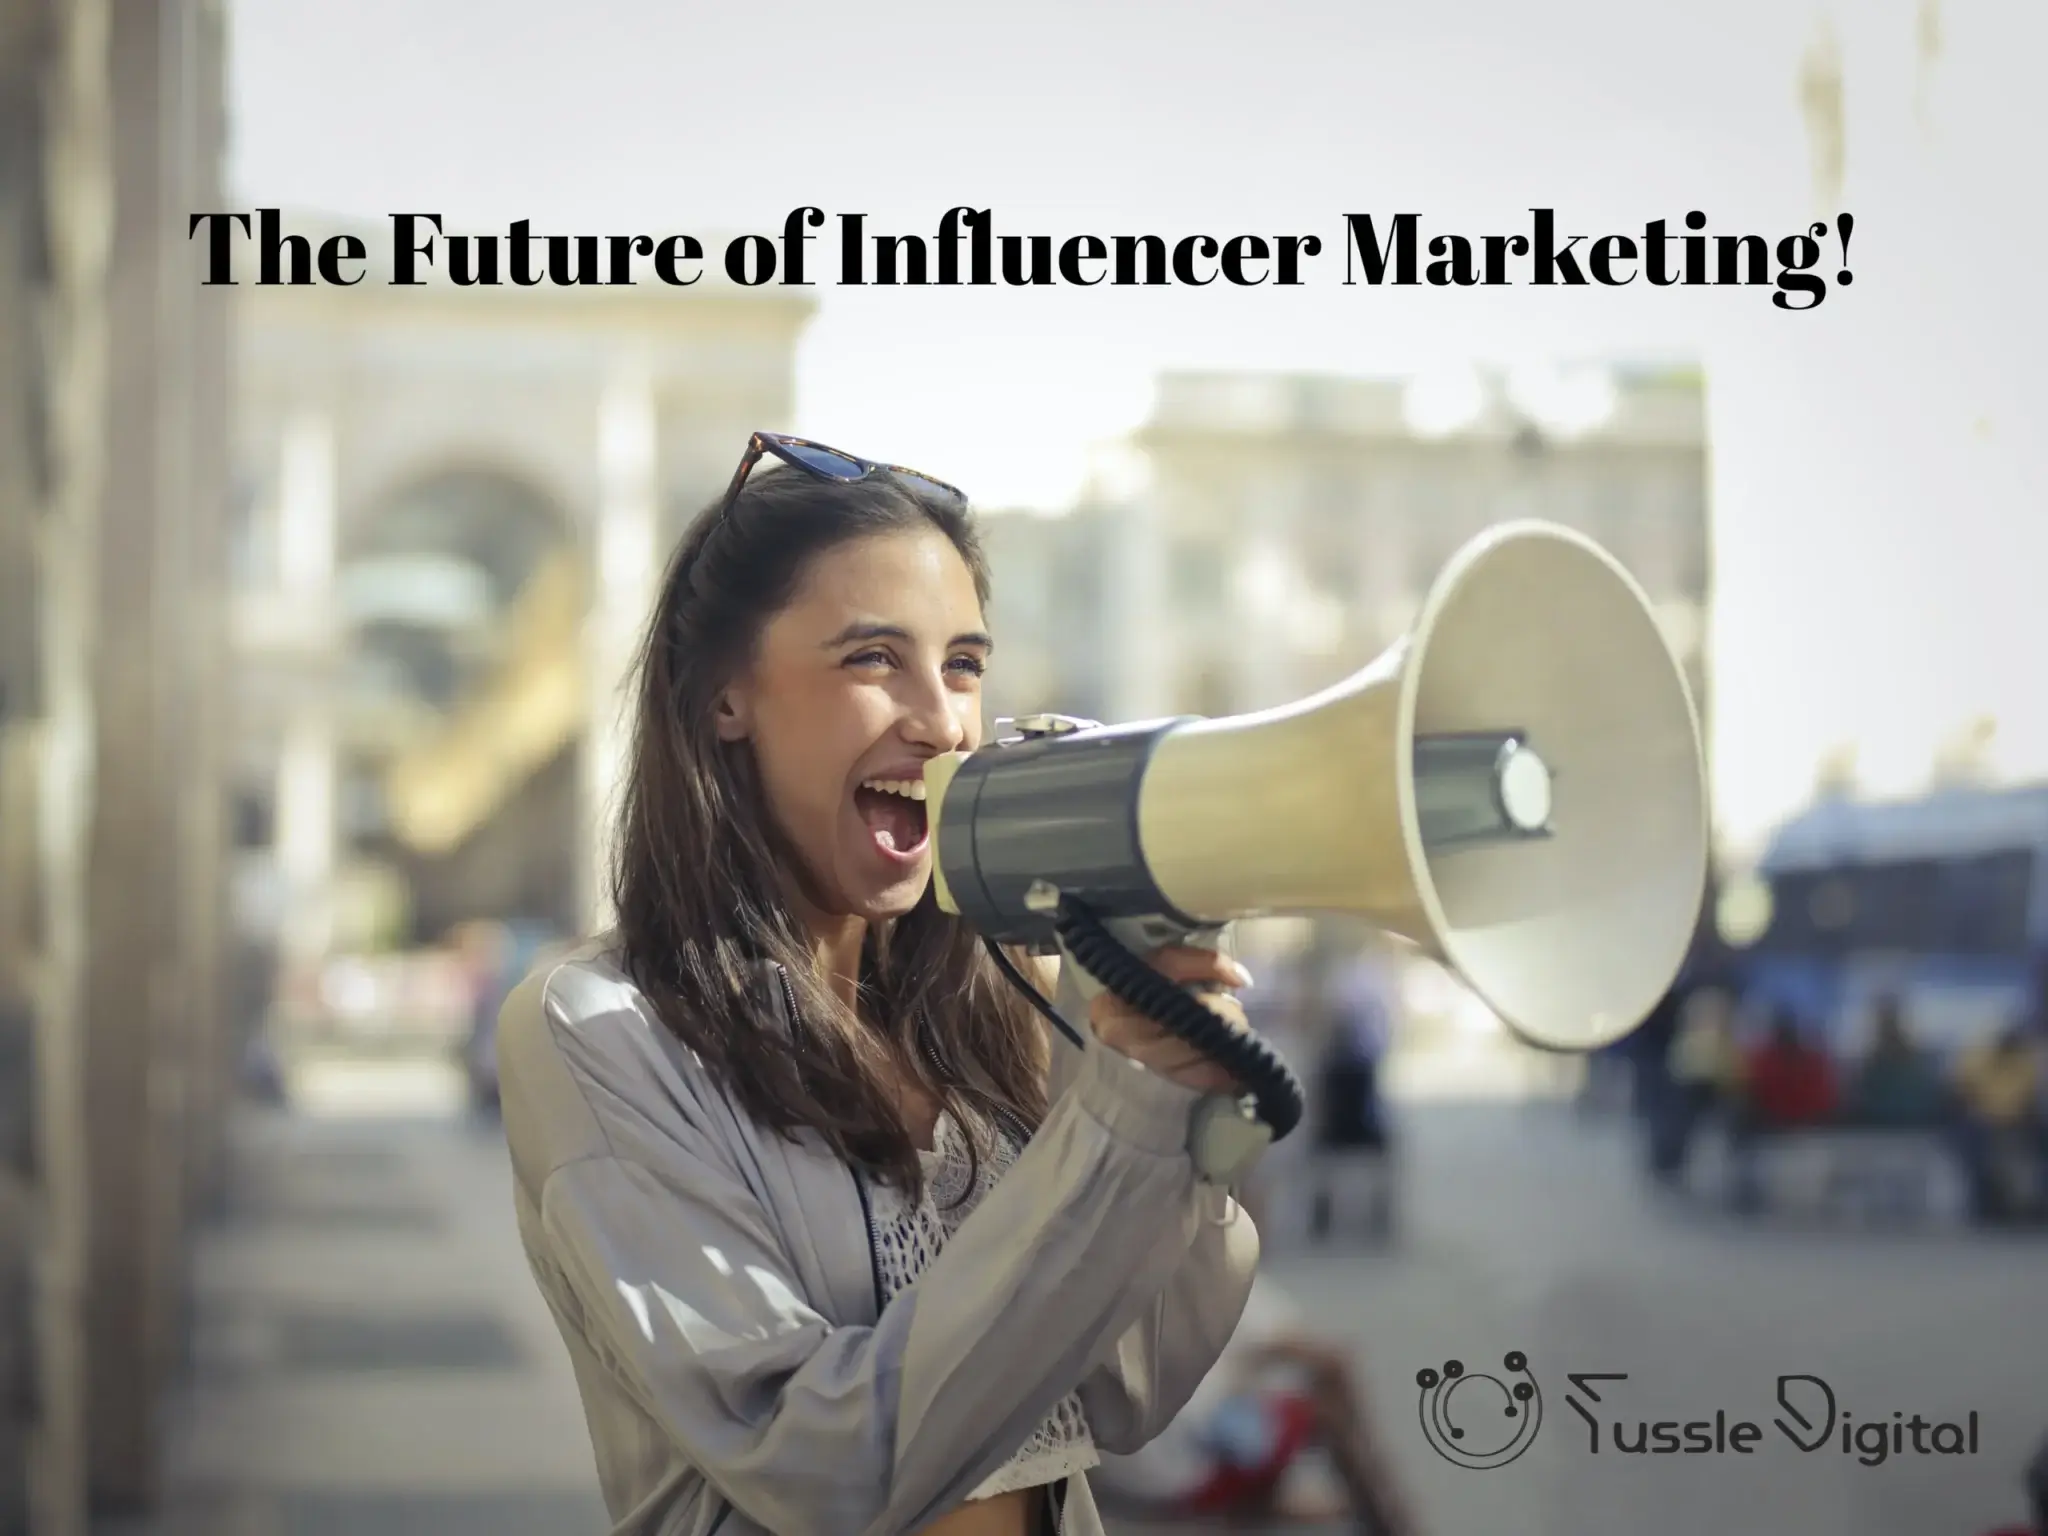 The Future of Influencer Marketing!